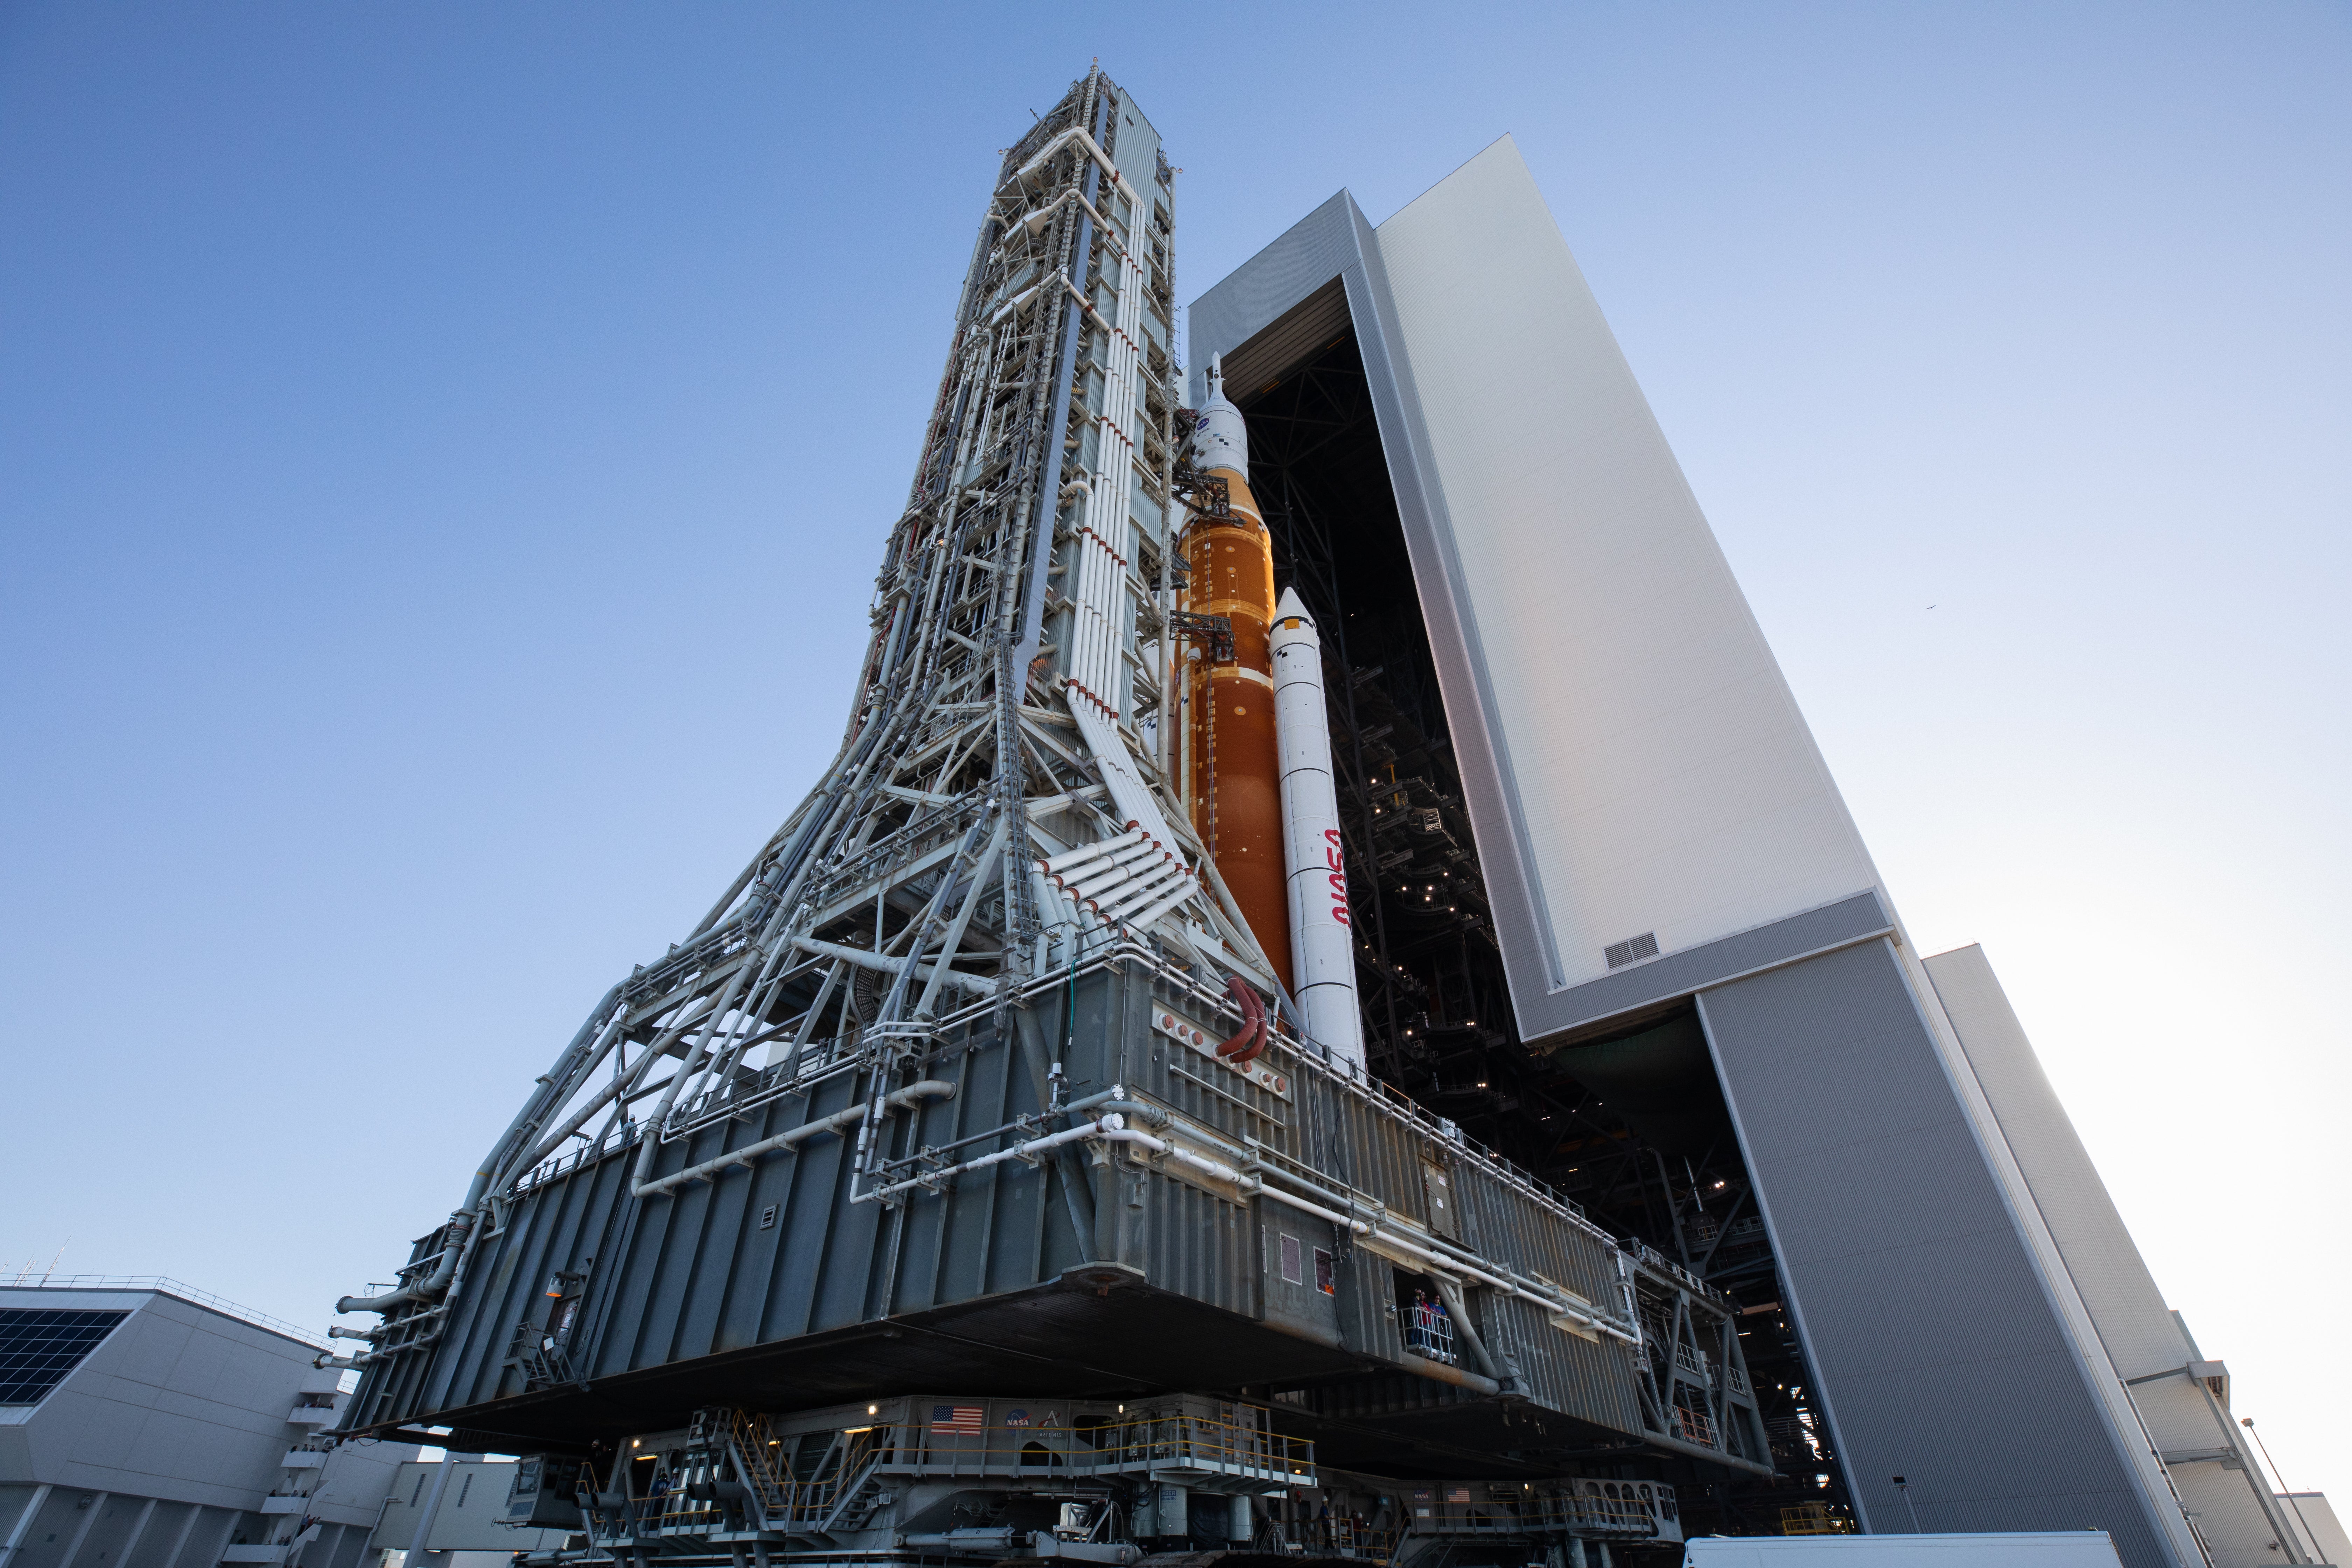 SLS leaving the Vehicle Assembly Building at NASA's Kennedy Space Centre in Florida on March 17, 2022. (Photo: NASA/Kim Shiflett)